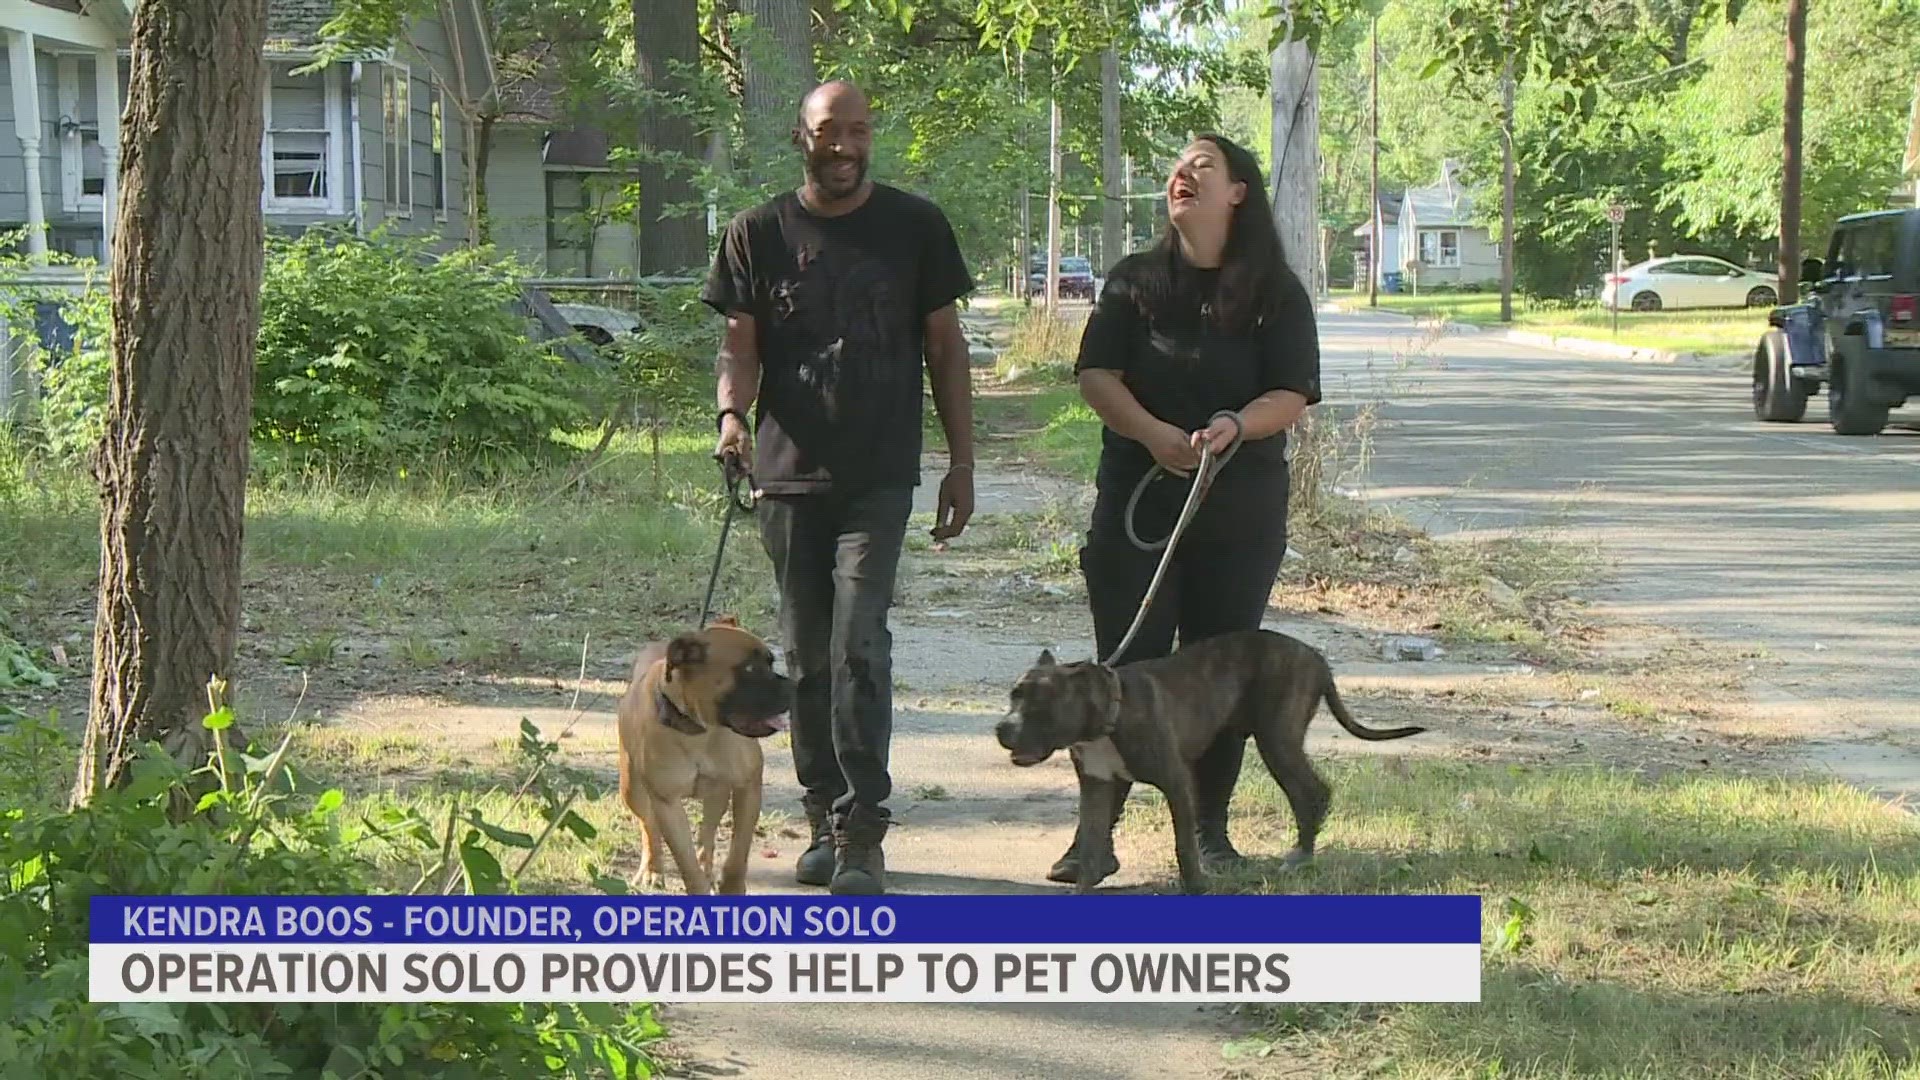 Operation Solo provides temporary assistance to dog owners in need.